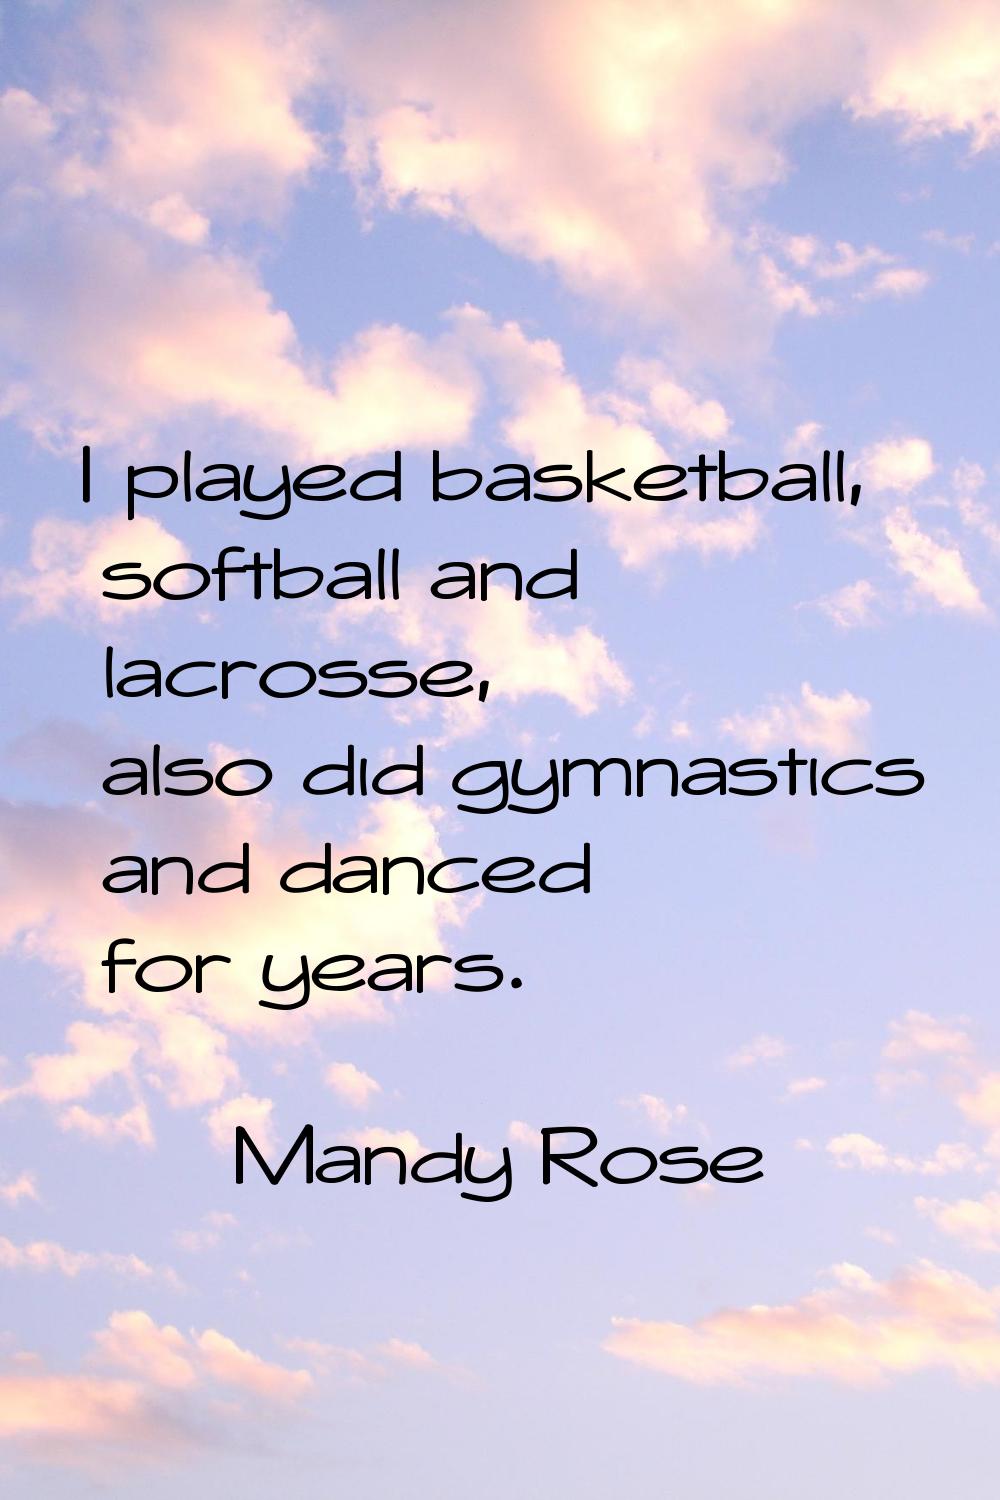 I played basketball, softball and lacrosse, also did gymnastics and danced for years.